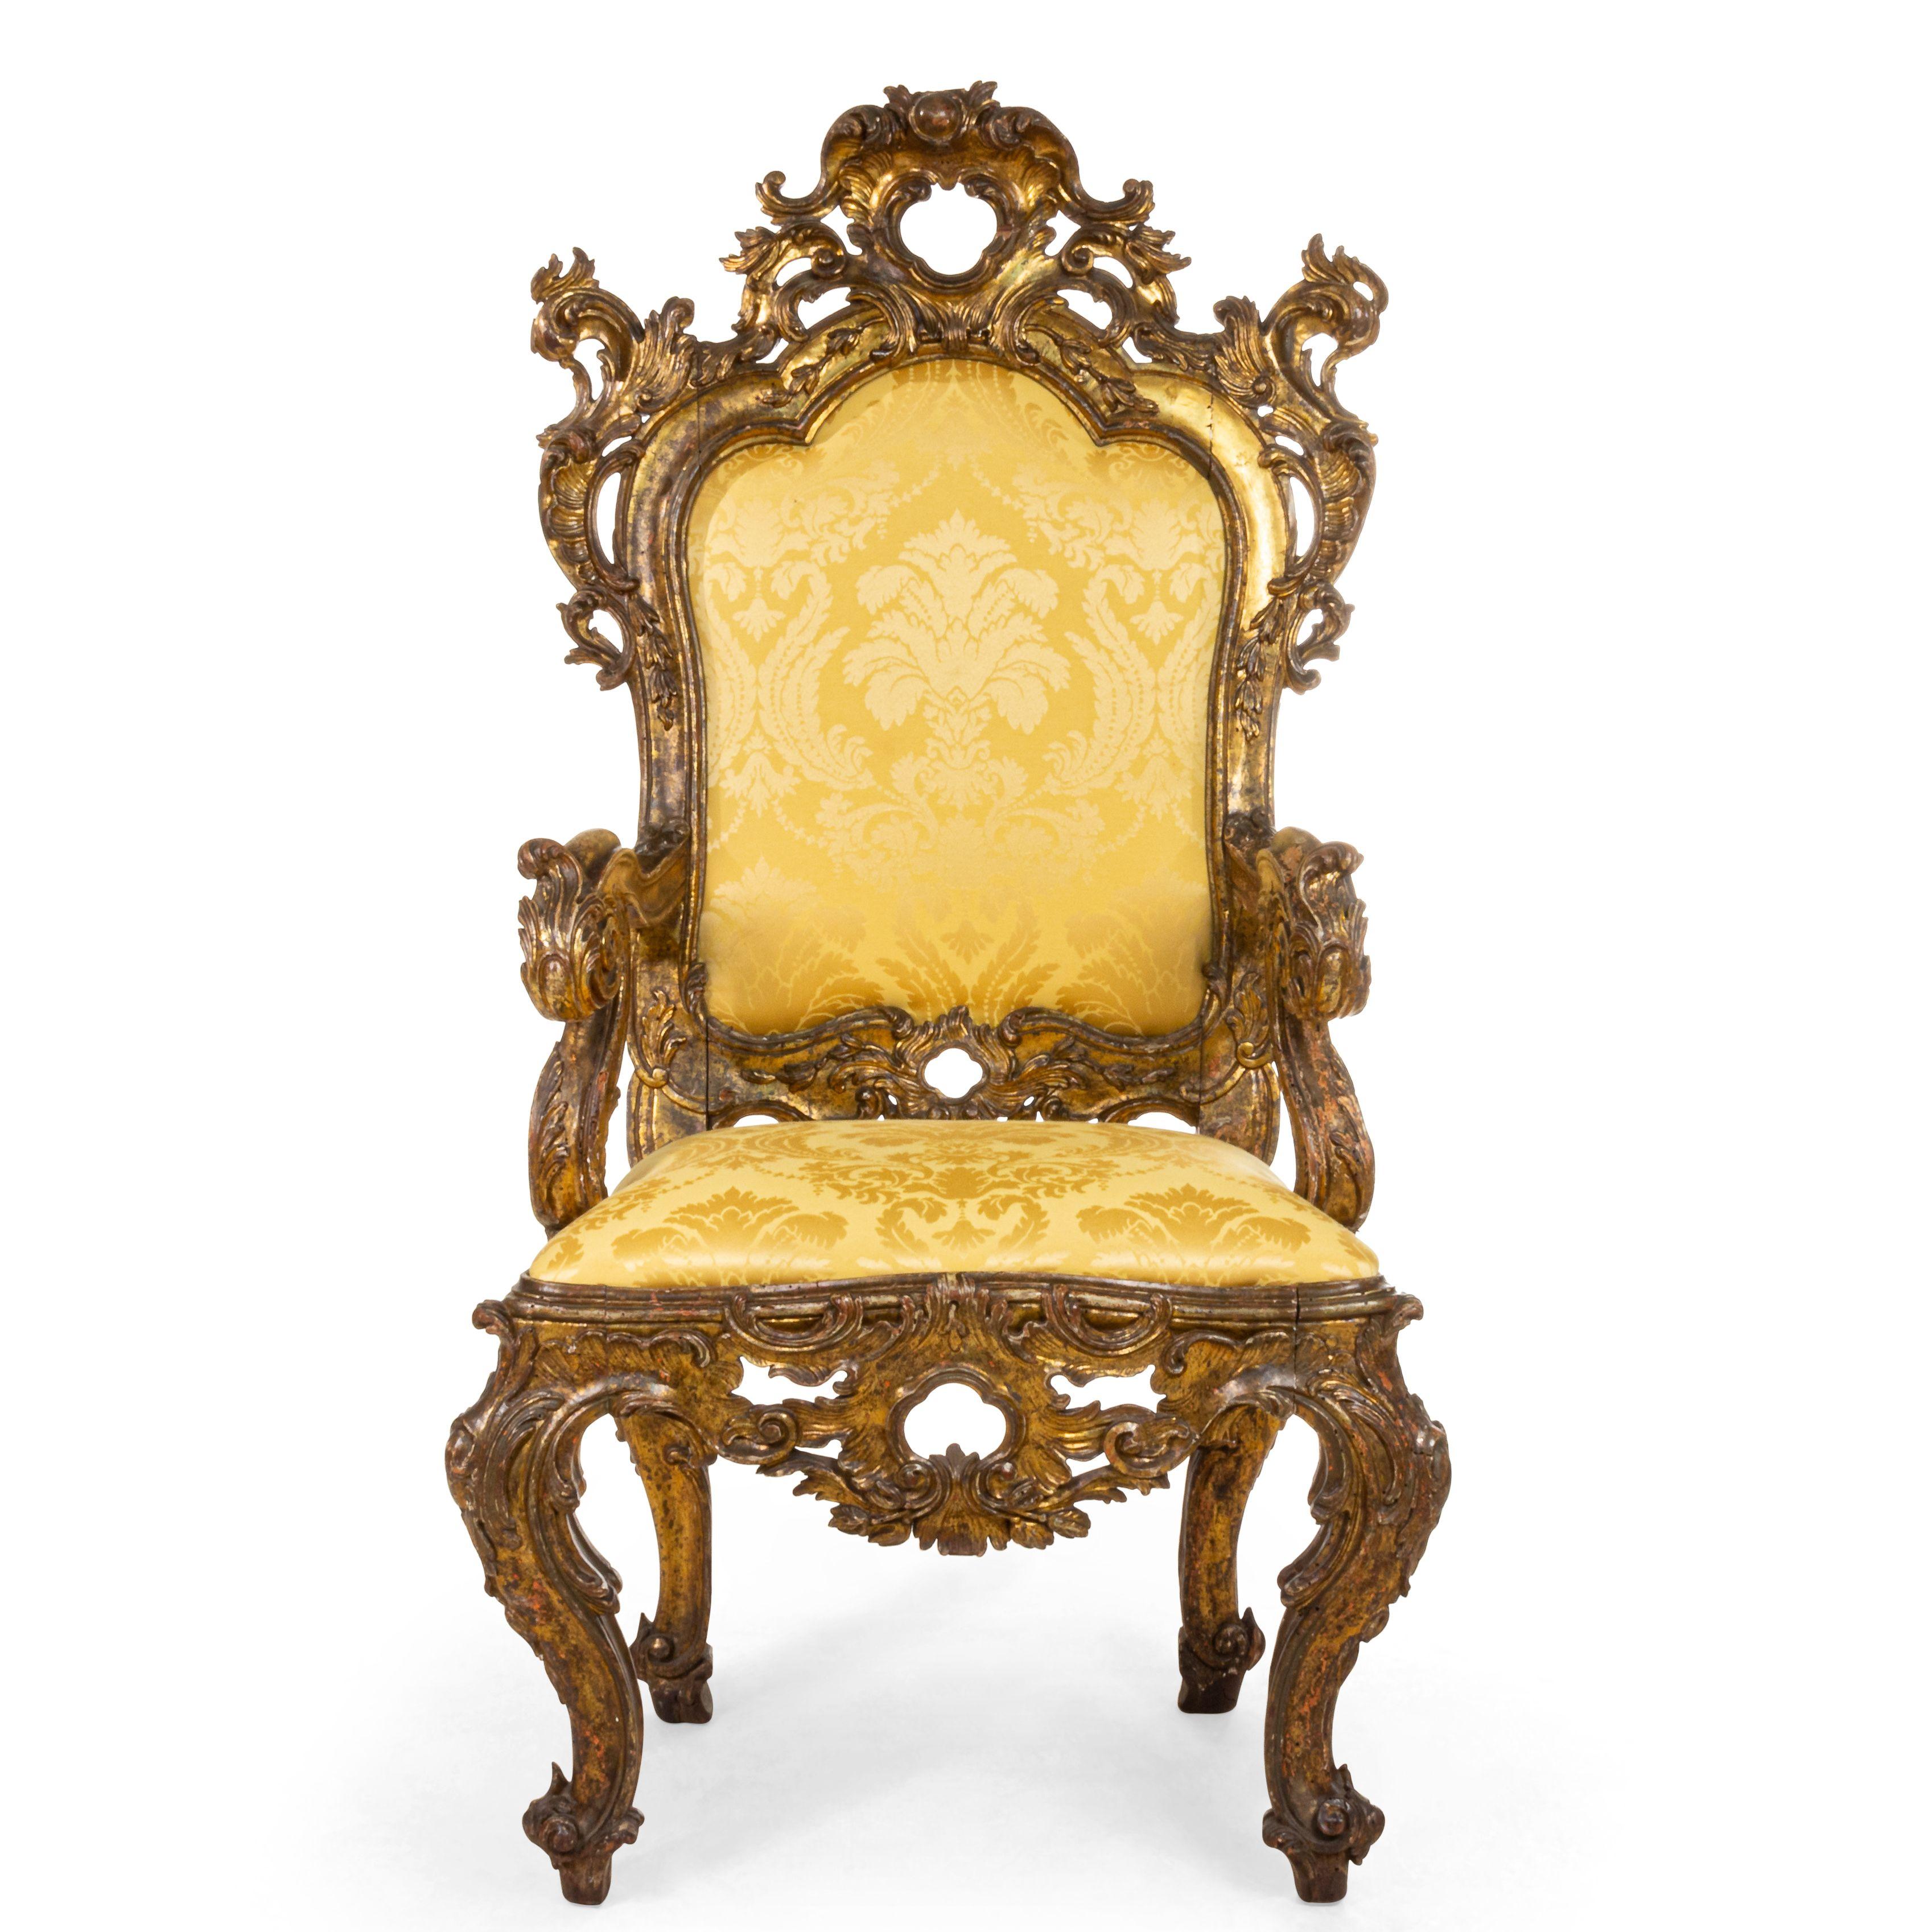 Antique Italian Rococo high back gilt carved throne chairs with gold damask slip seat and back.